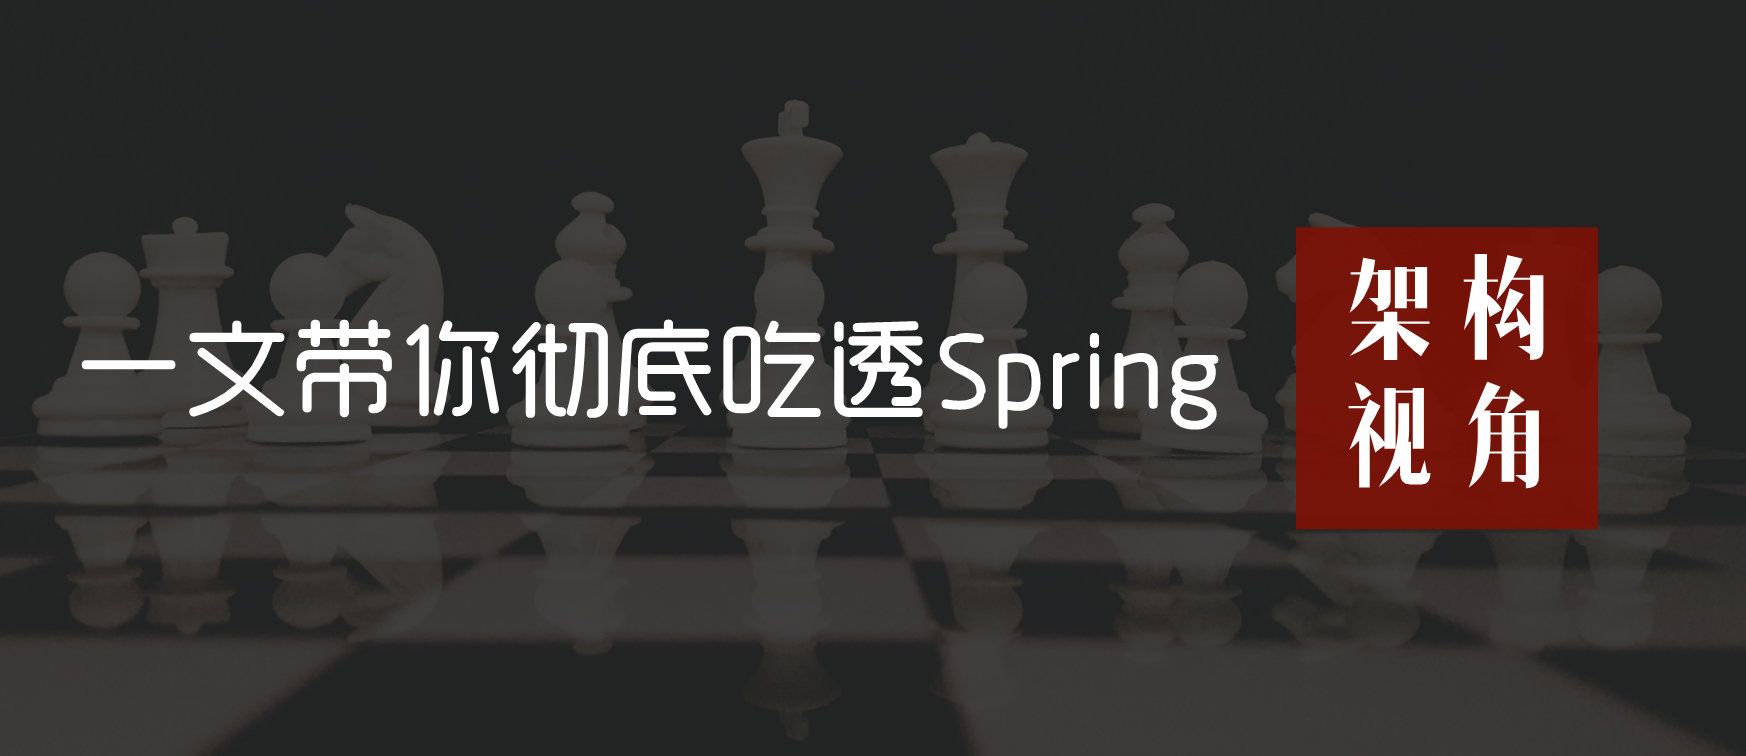 spring-core-cover